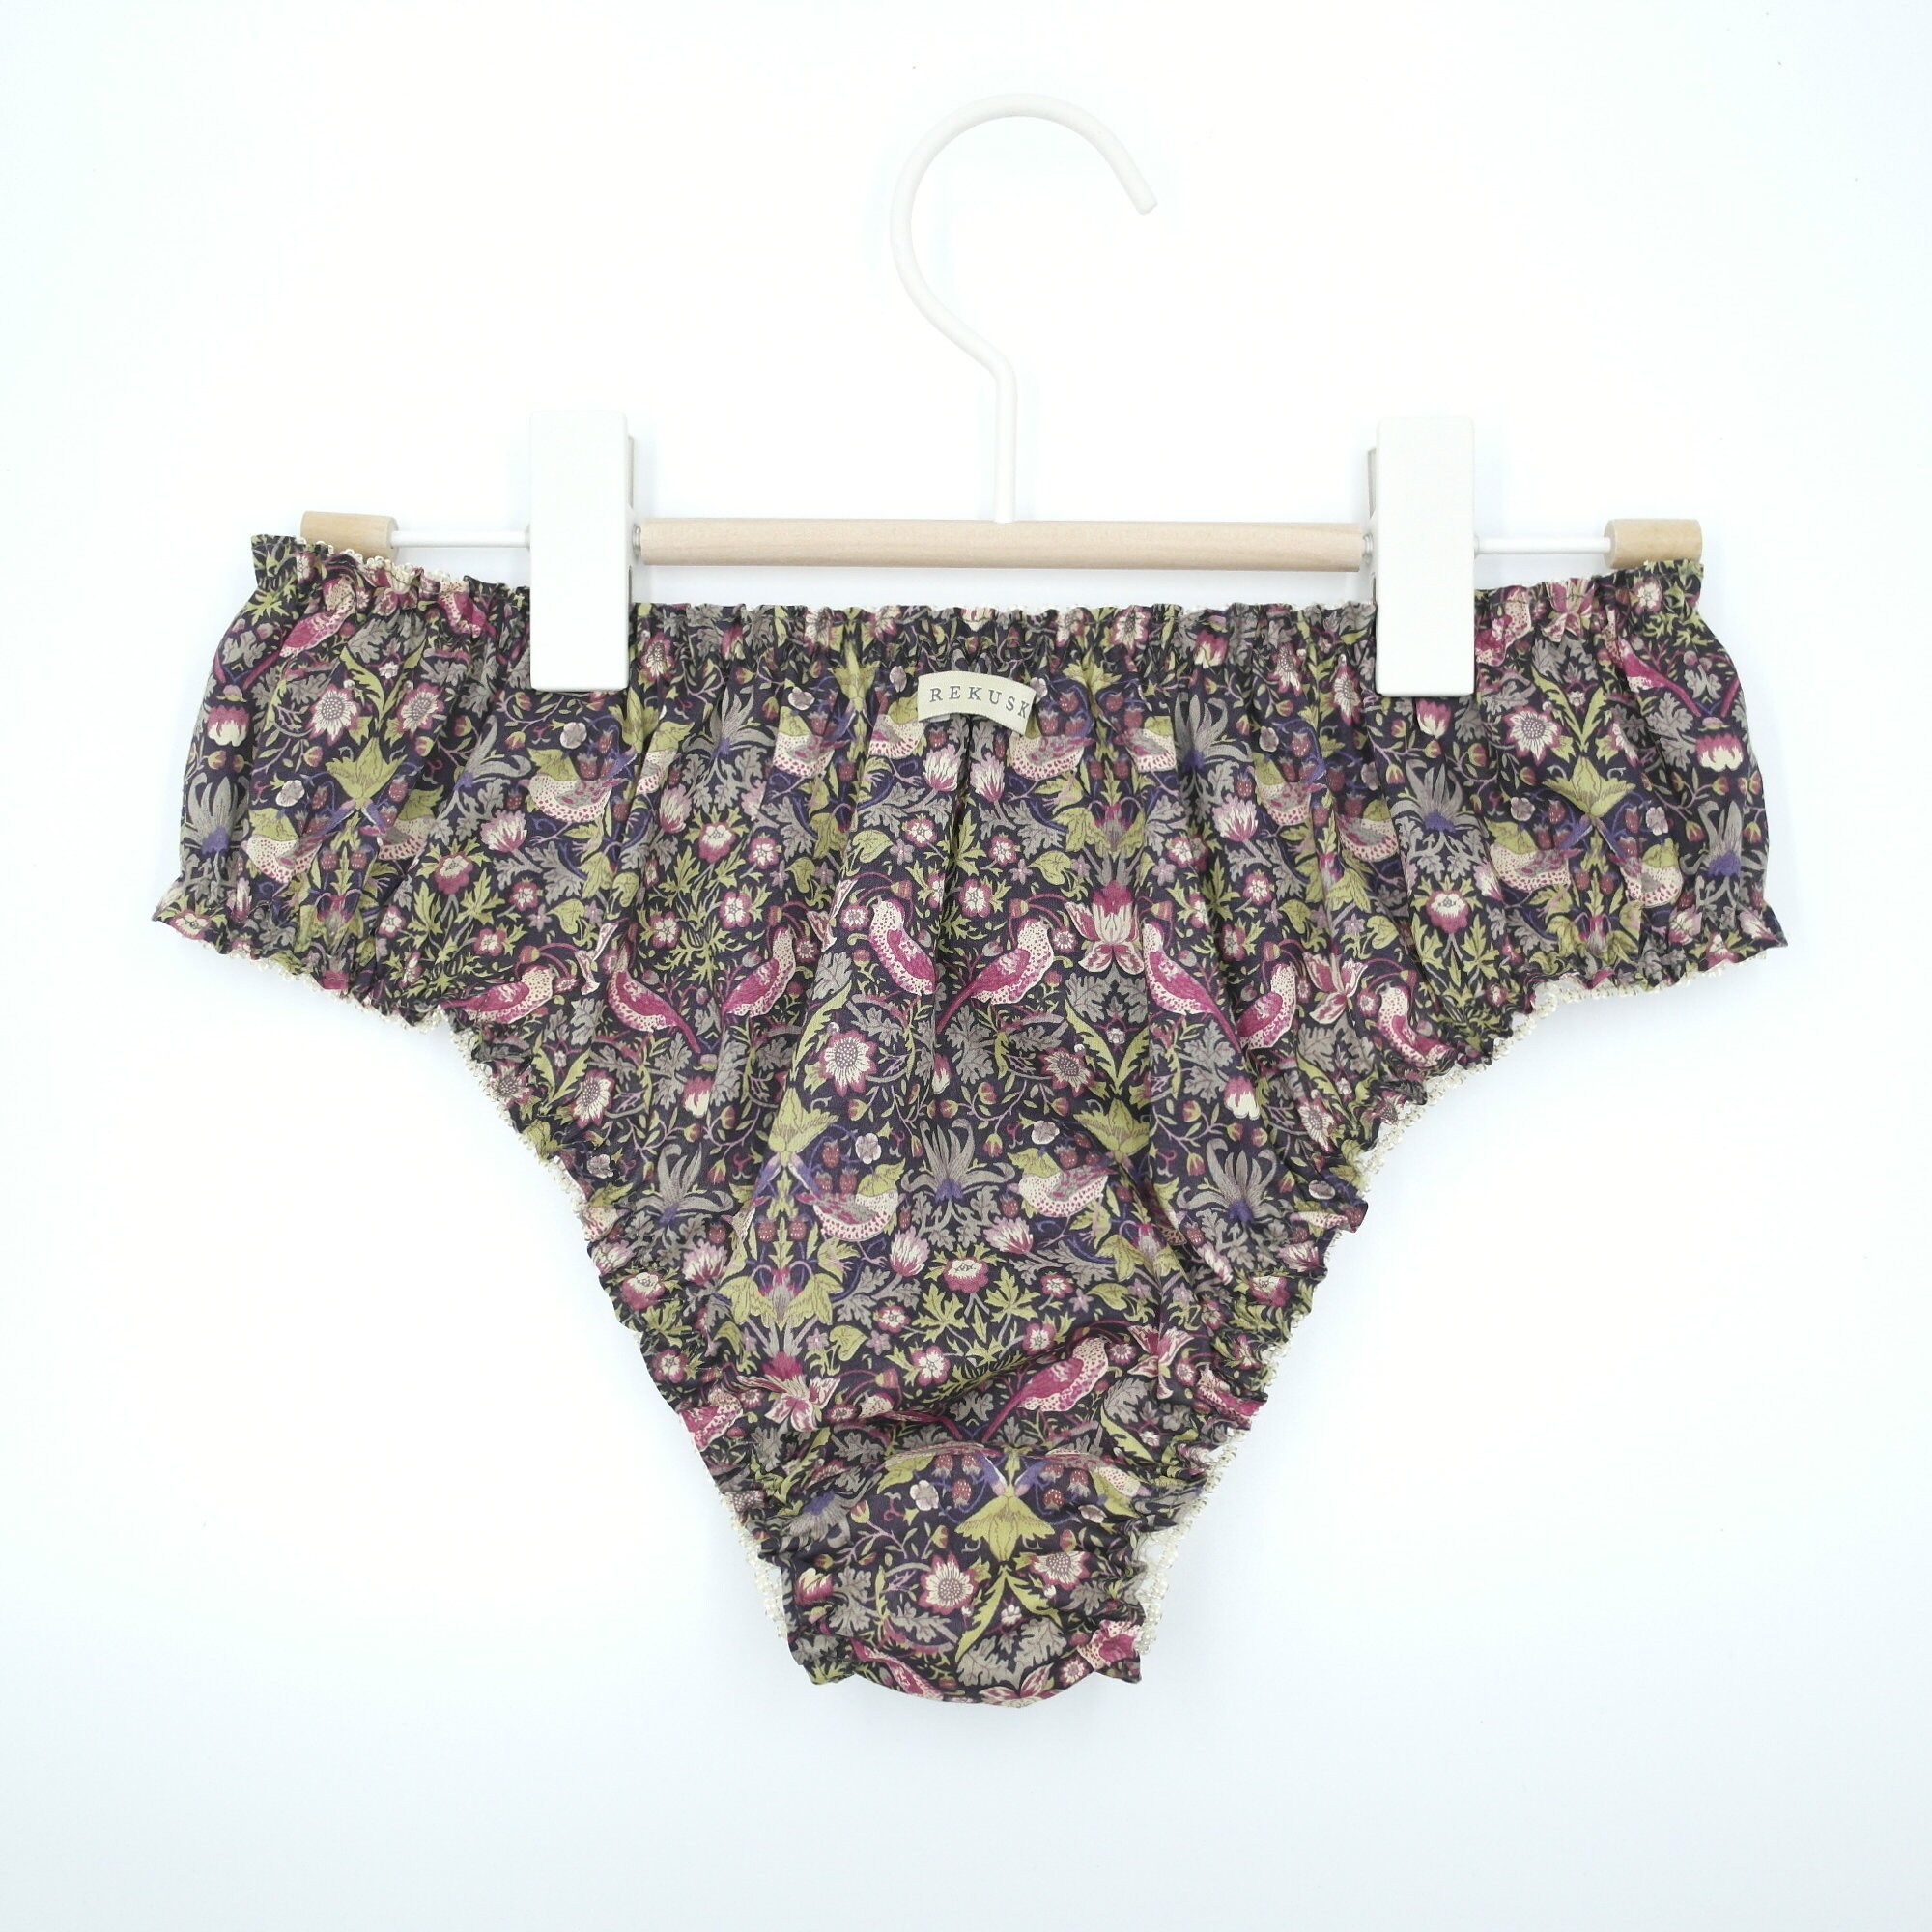 Romantic Women Panty William Morris Printed Knickers Frilly Comfy